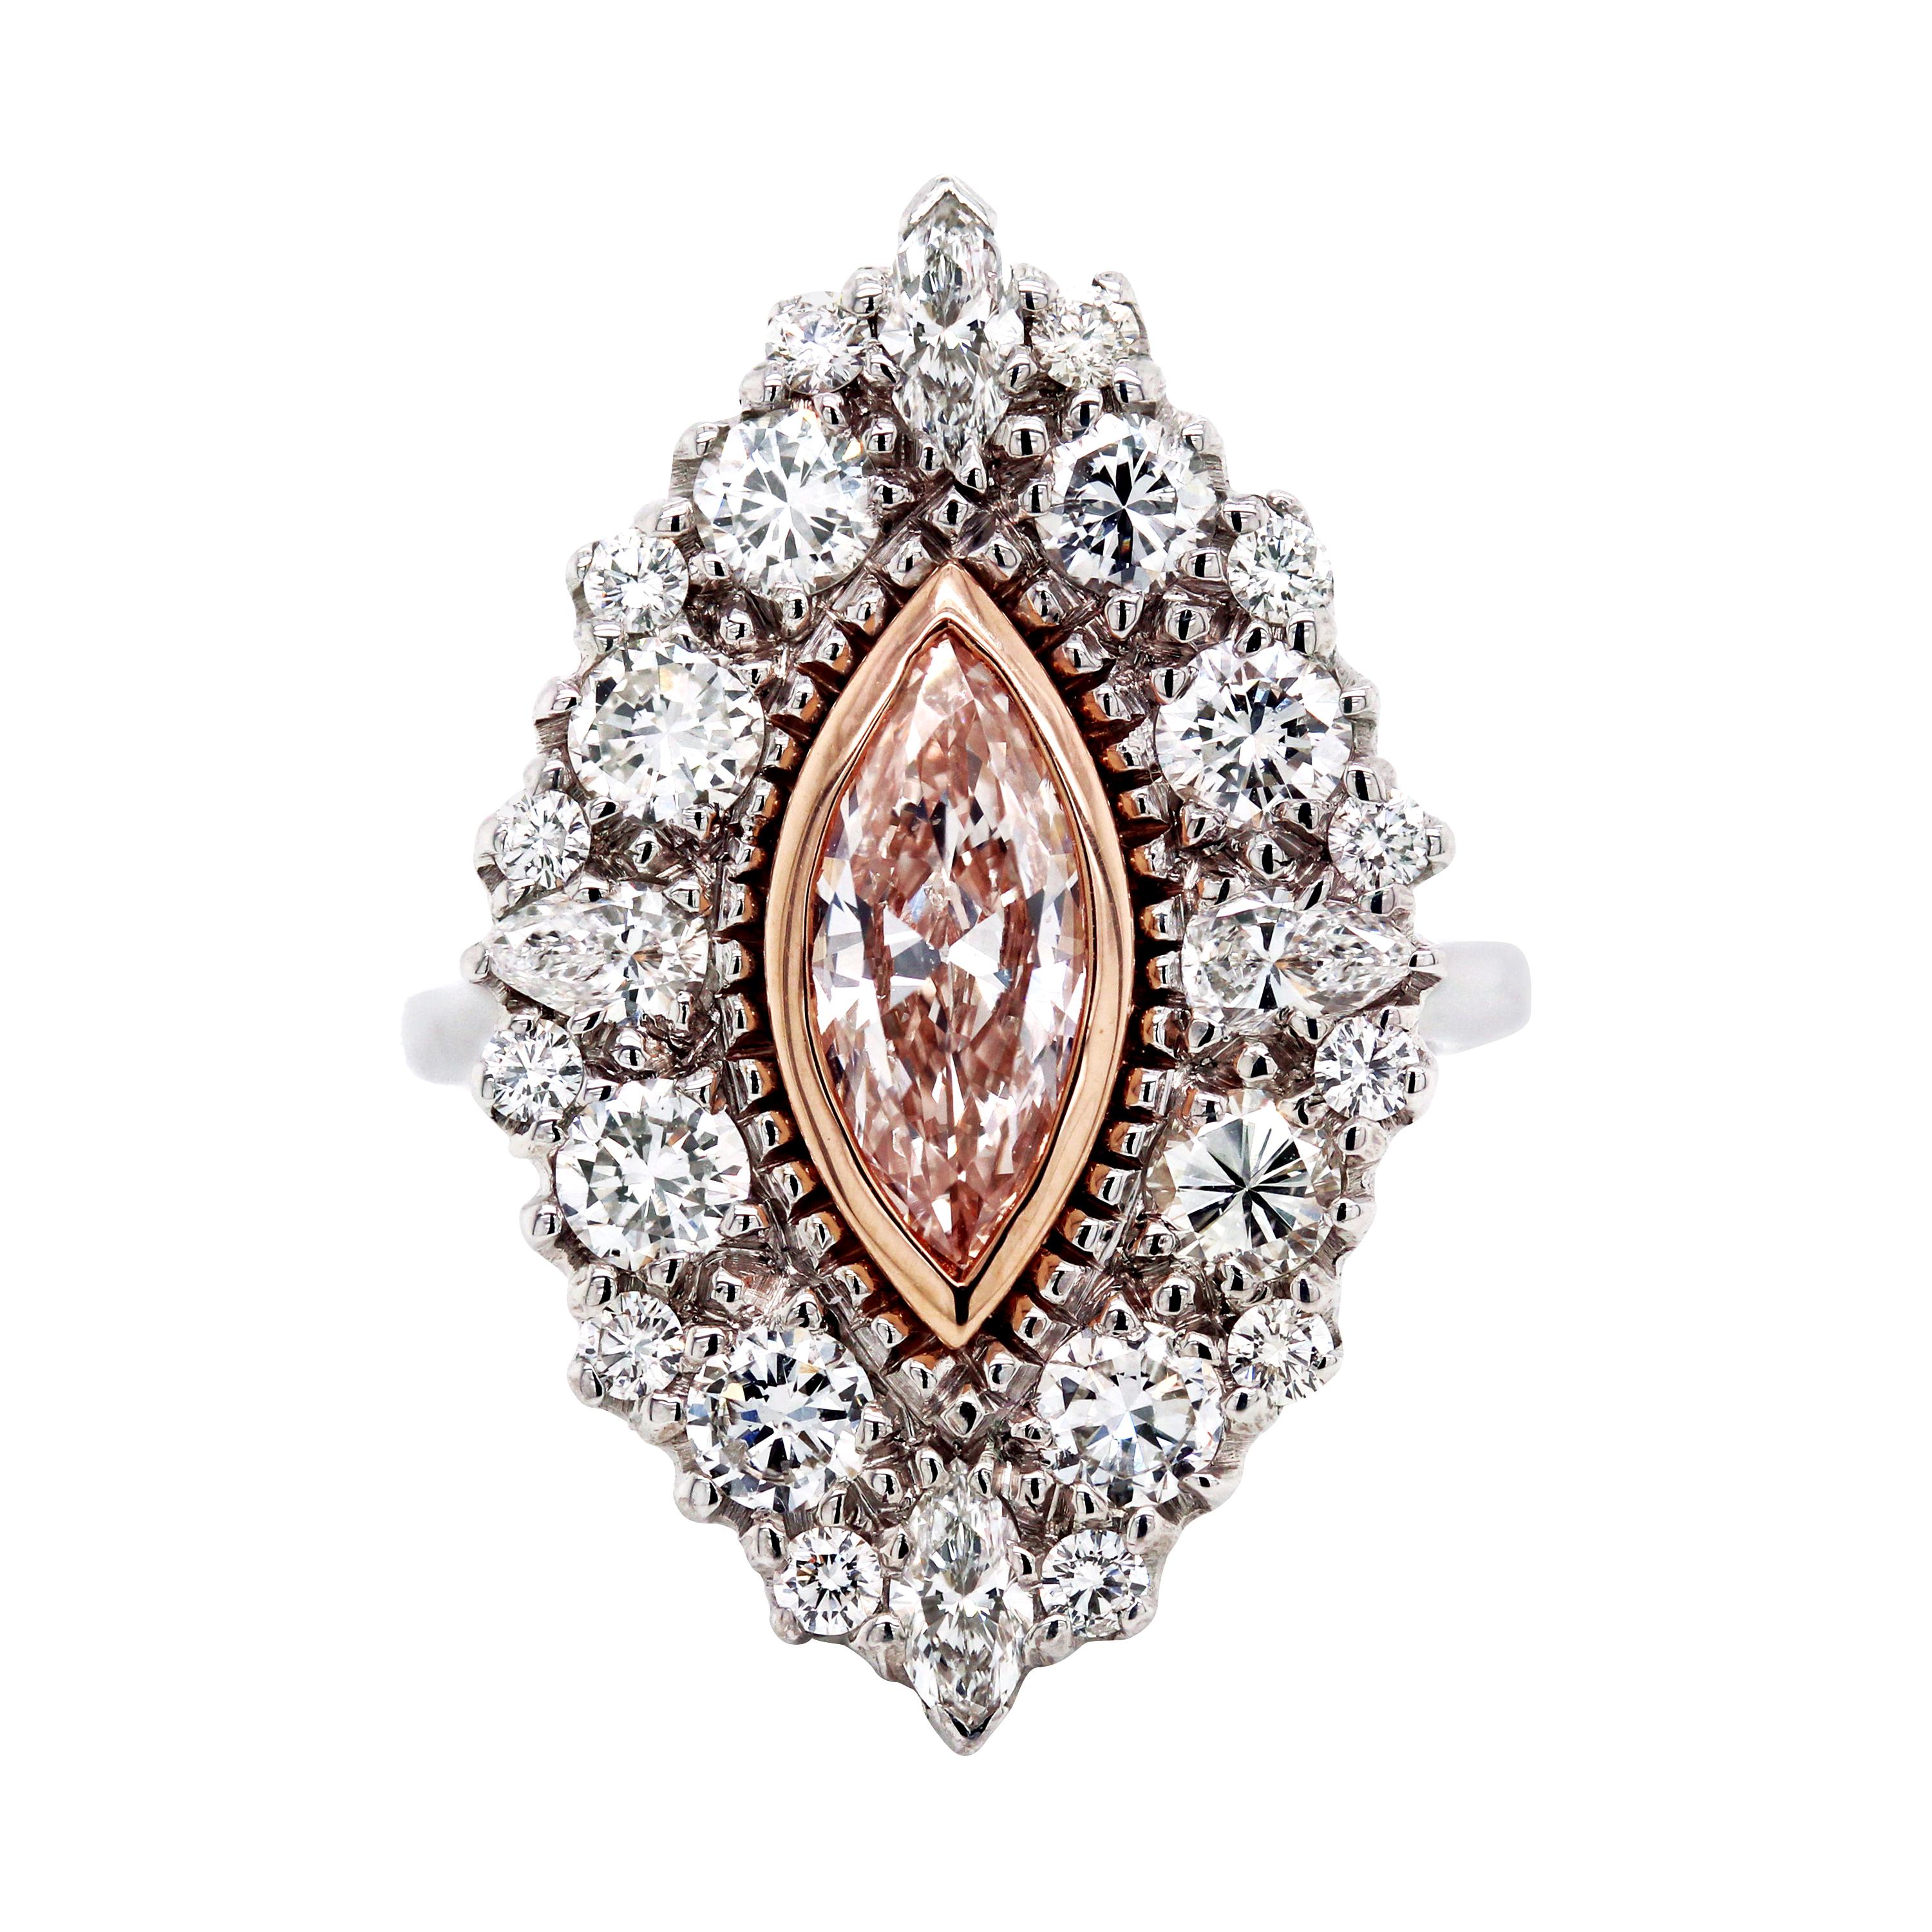 GIA Certified 0.88ct. Marquise Fancy Pink Diamond Center 18K White Gold Ring